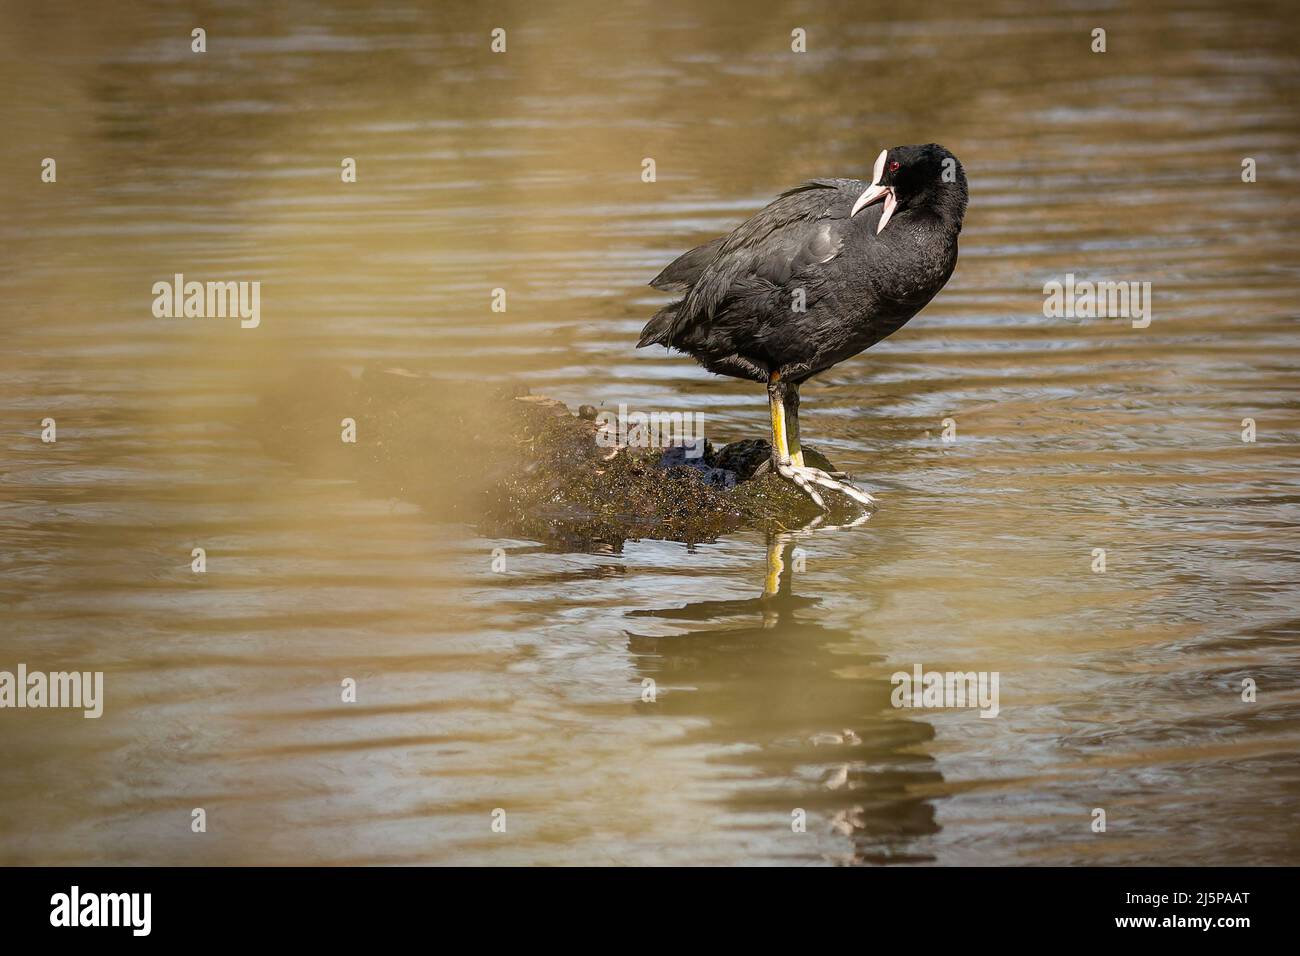 Funny looking black and white coot with yellow legs standing on a little island with its beak open. Sunny day in a park by a pond. Stock Photo